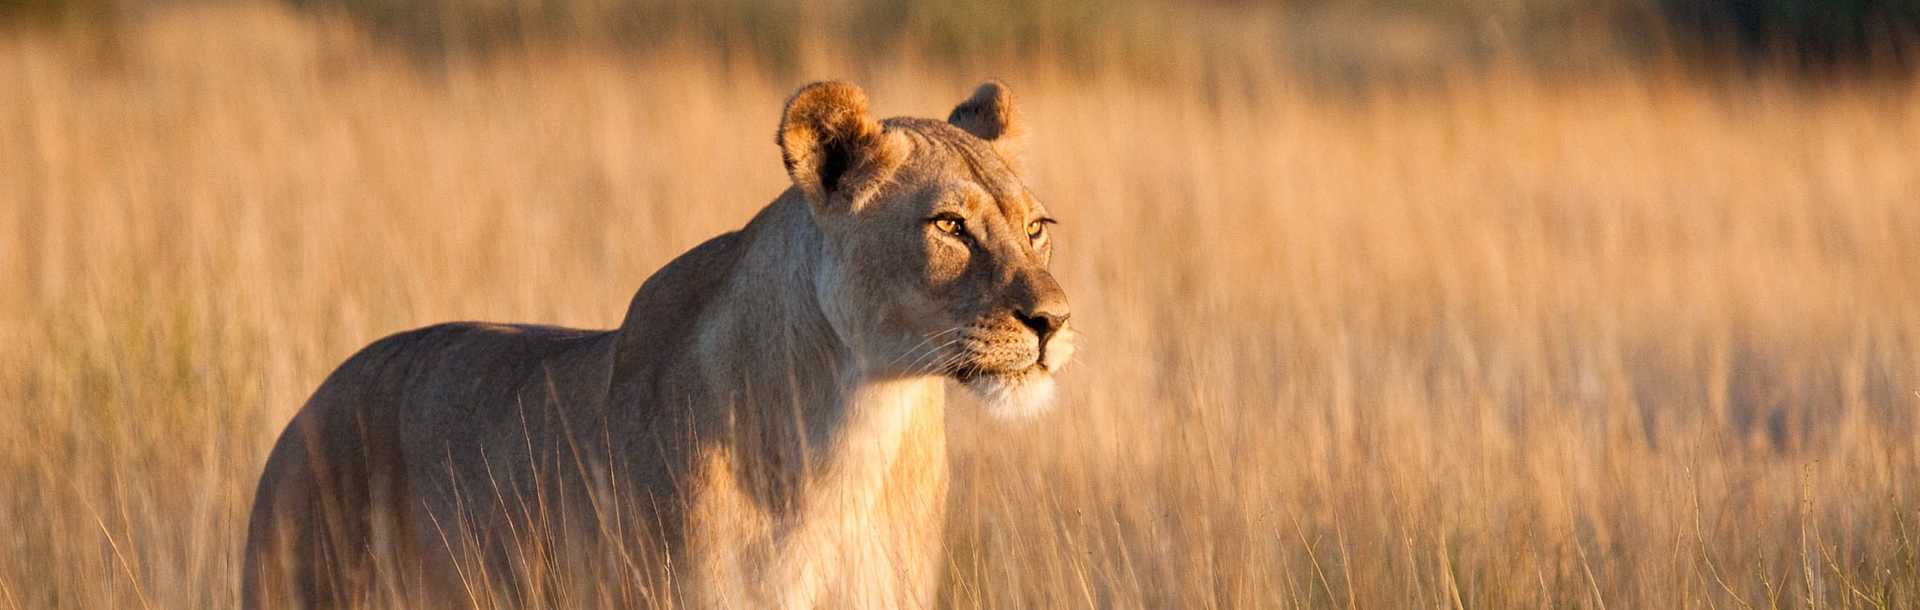 Lioness in long grass in Botswana, Africa